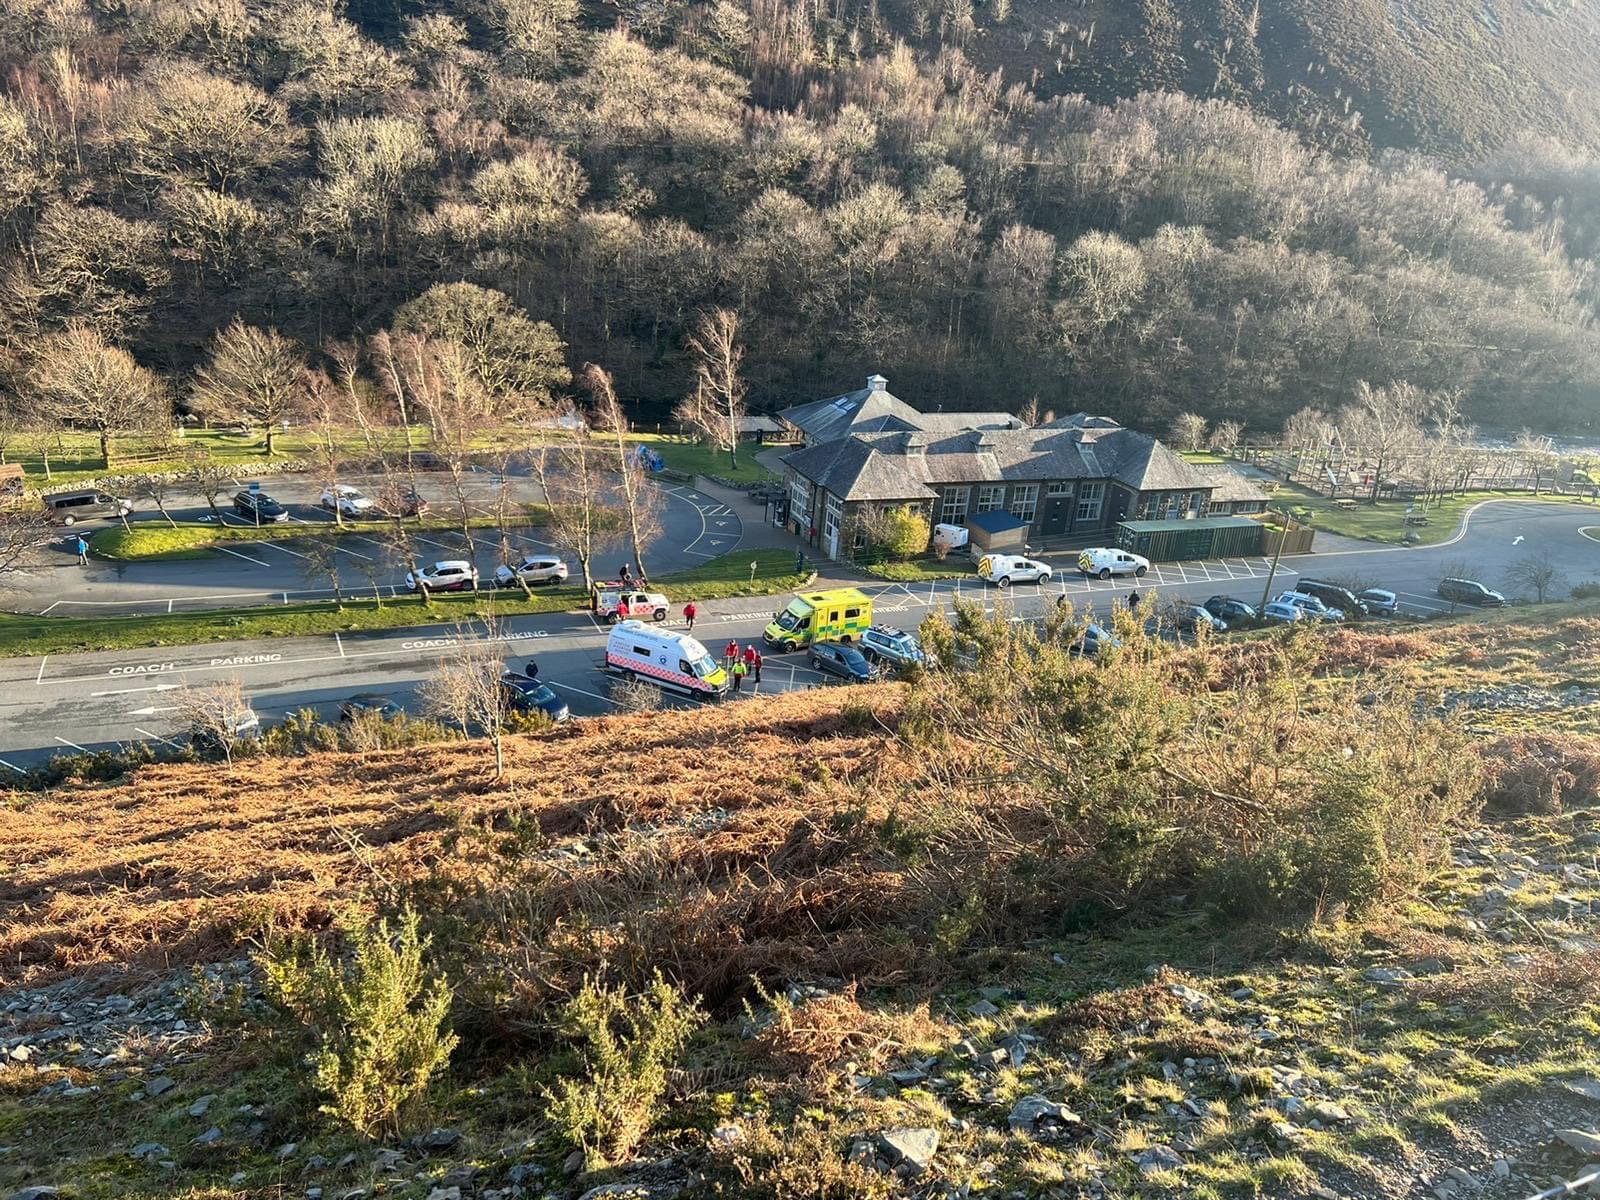 NEWS | Mountain Rescue Team called to Elan Valley Visitor Centre to help injured lady